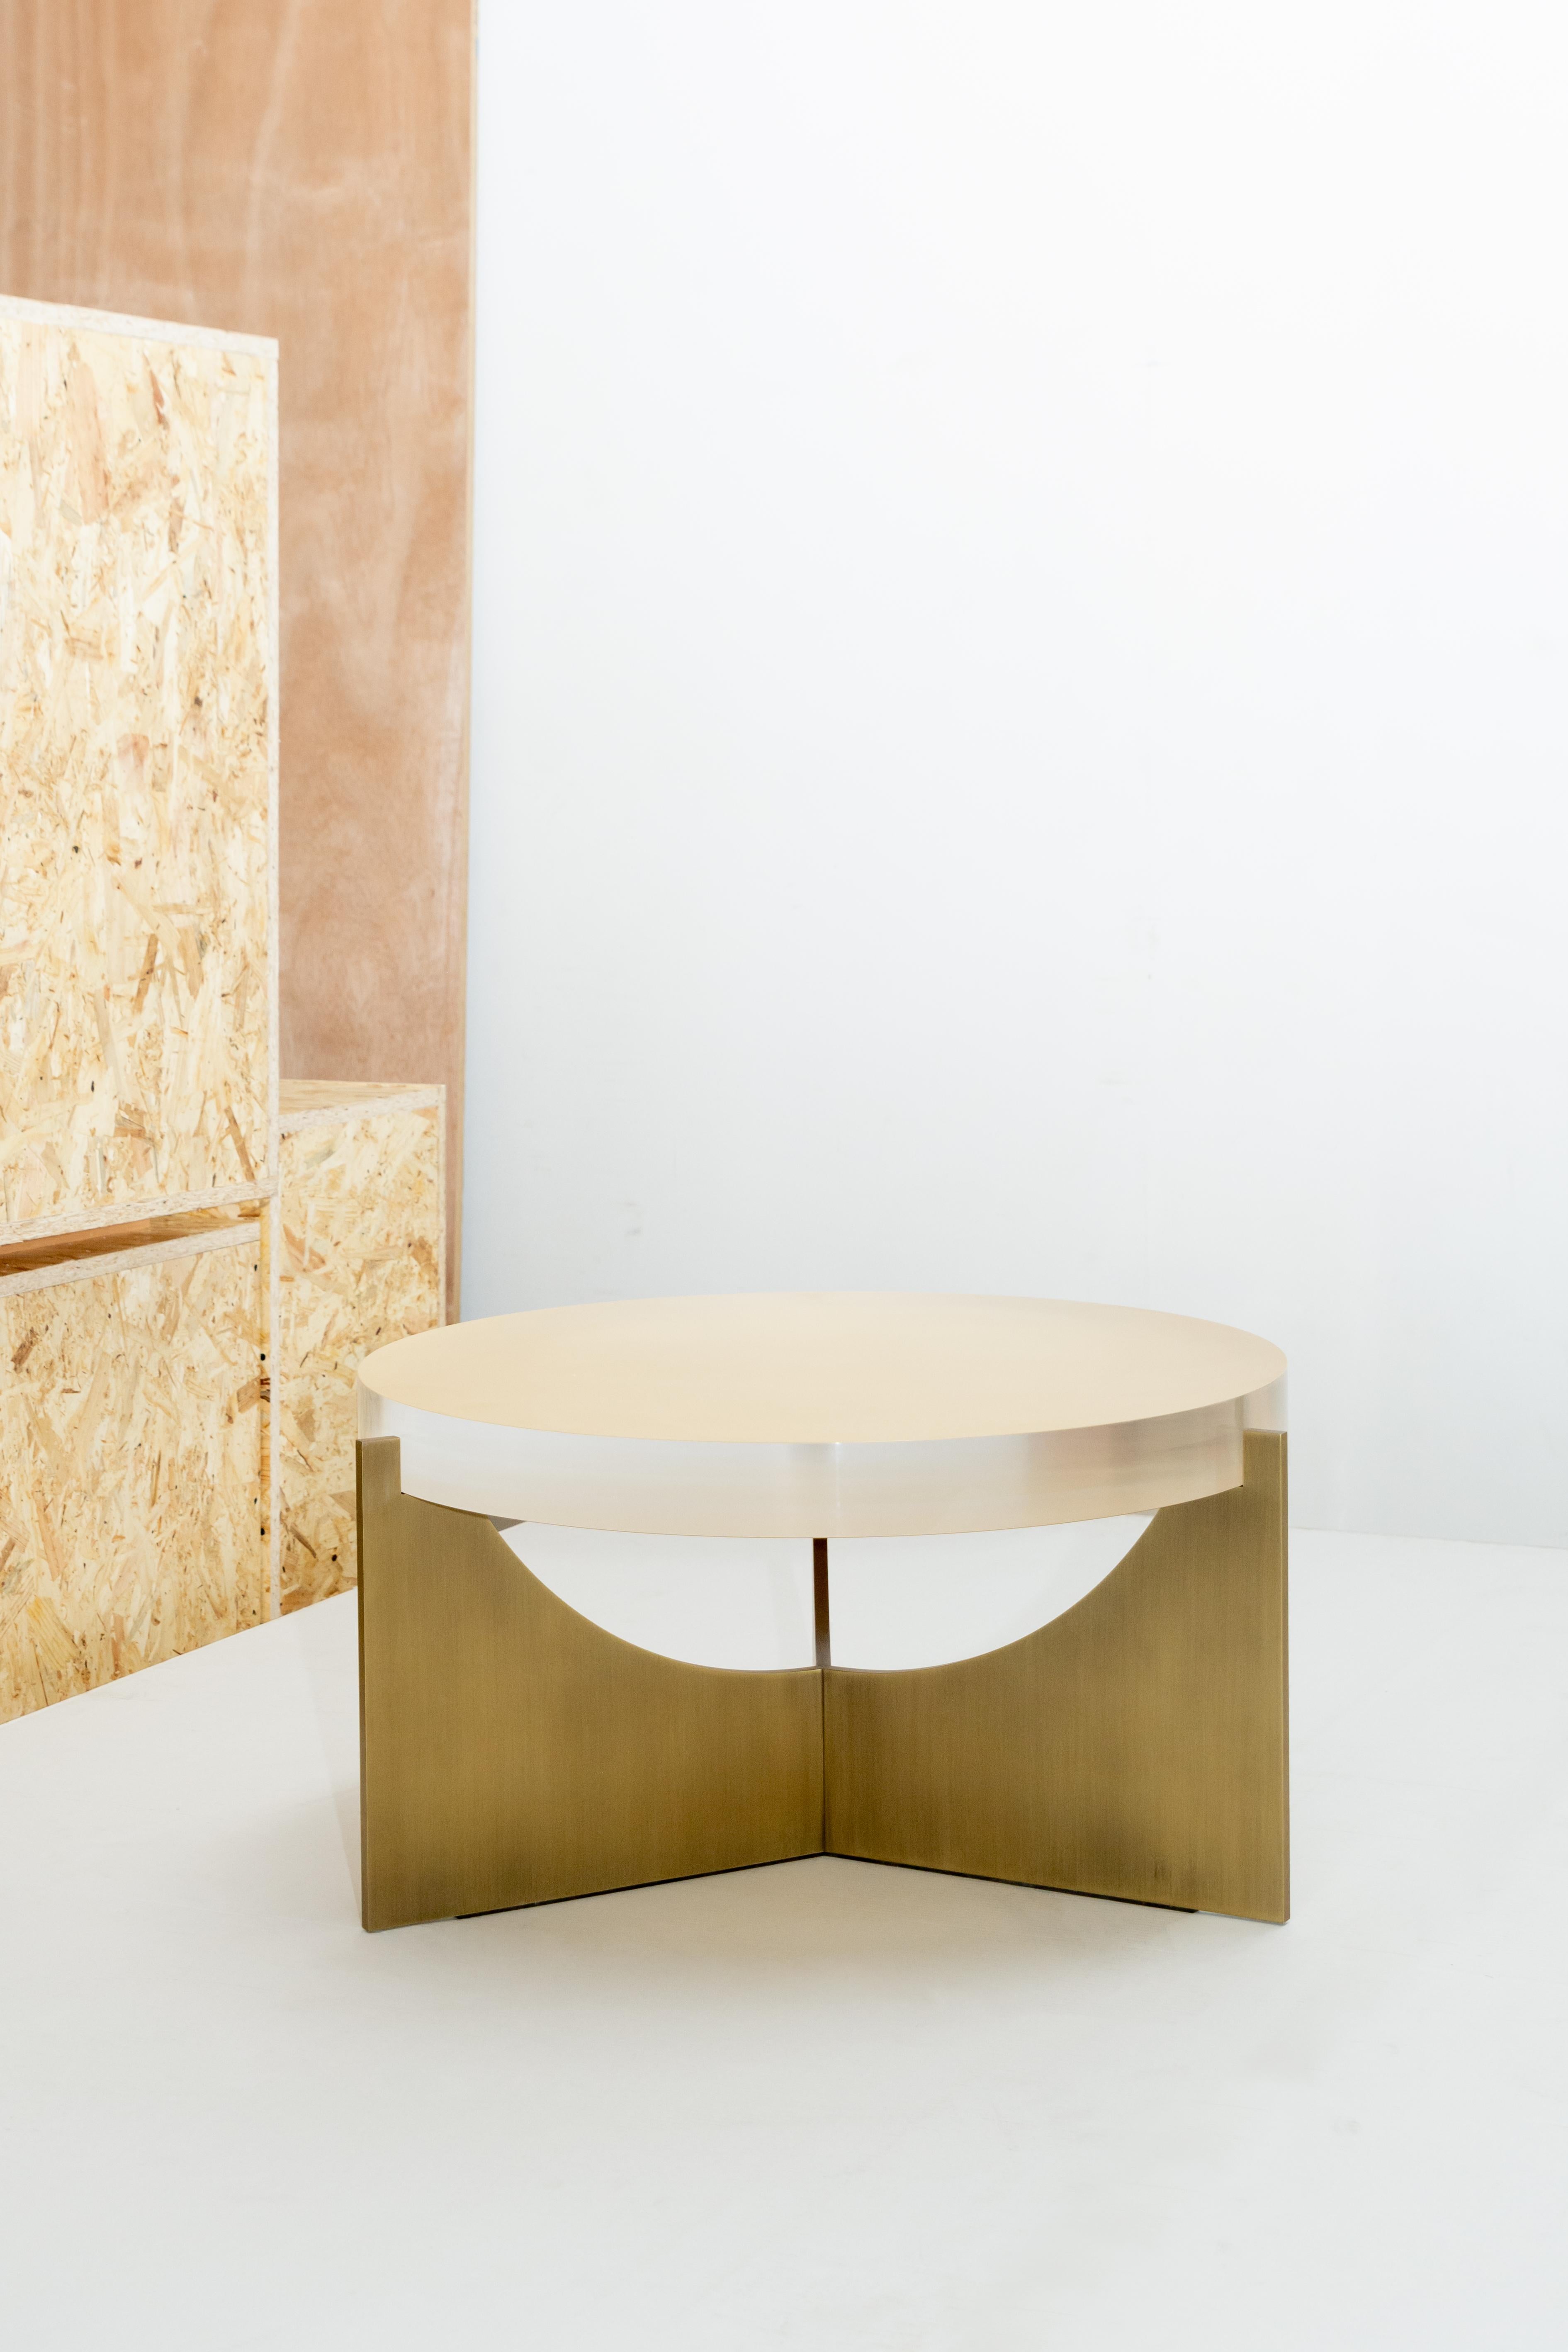 Umbra side table by Simon Hamui
Dimensions: D 70 x W 70 x H 37 cm
Materials: metal, Acrylic, gold leaf
Also available in different dimensions and materials. 

Side table made up of a metal base with a solid acrylic top underlined with a silver